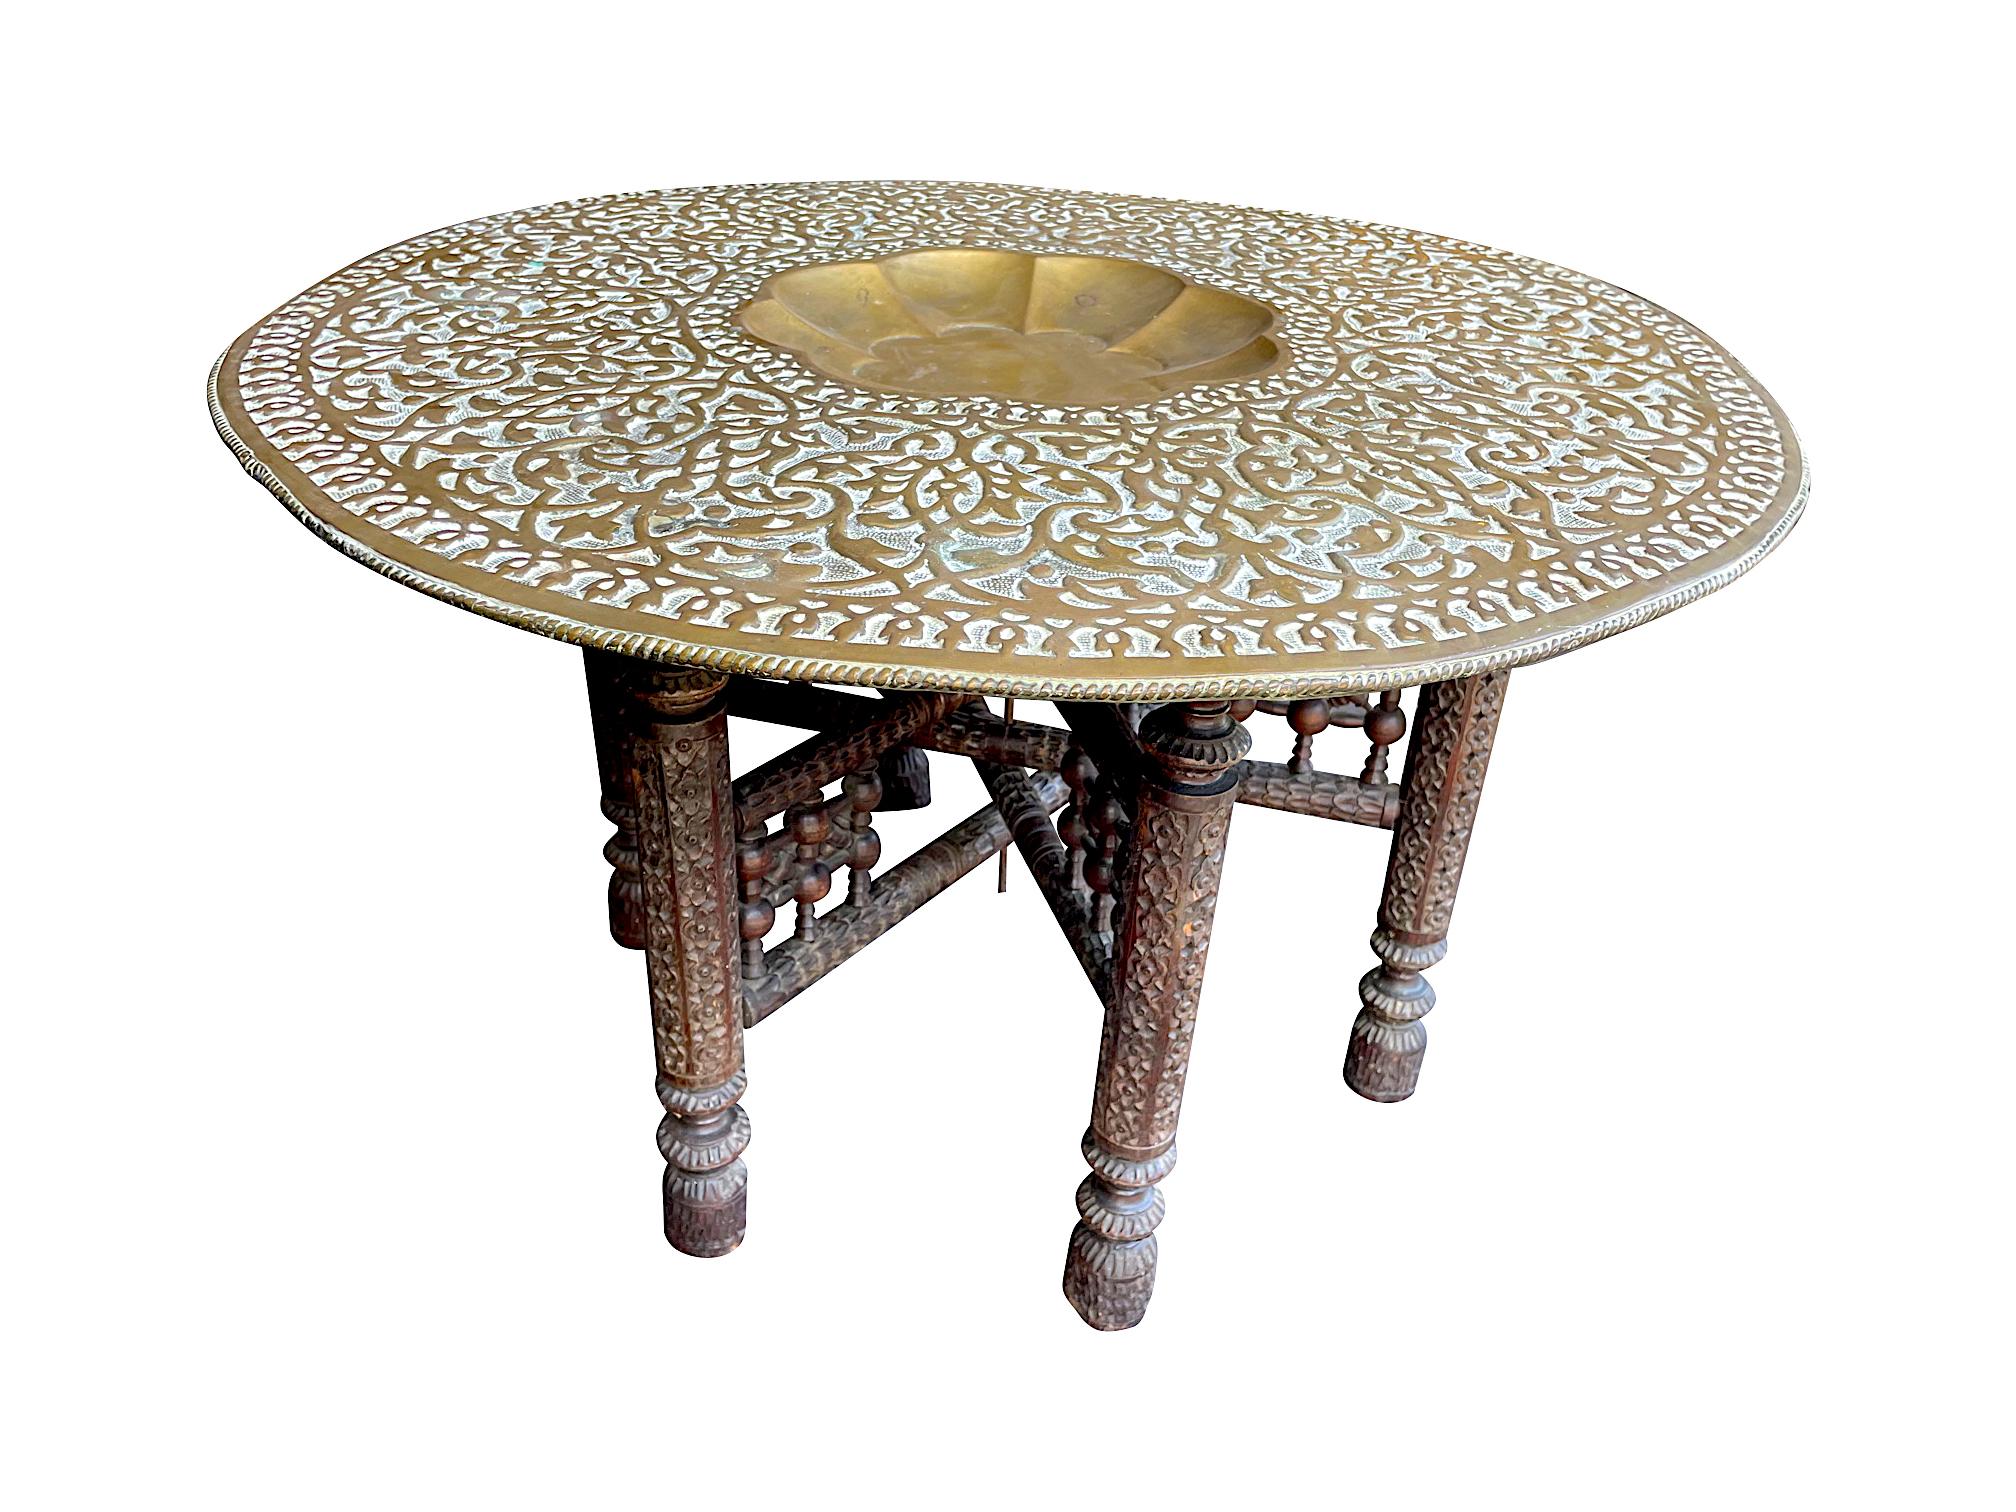 1920s Moroccan Carved Wooden Folding Table with Beautiful Hammered Brass Top 5